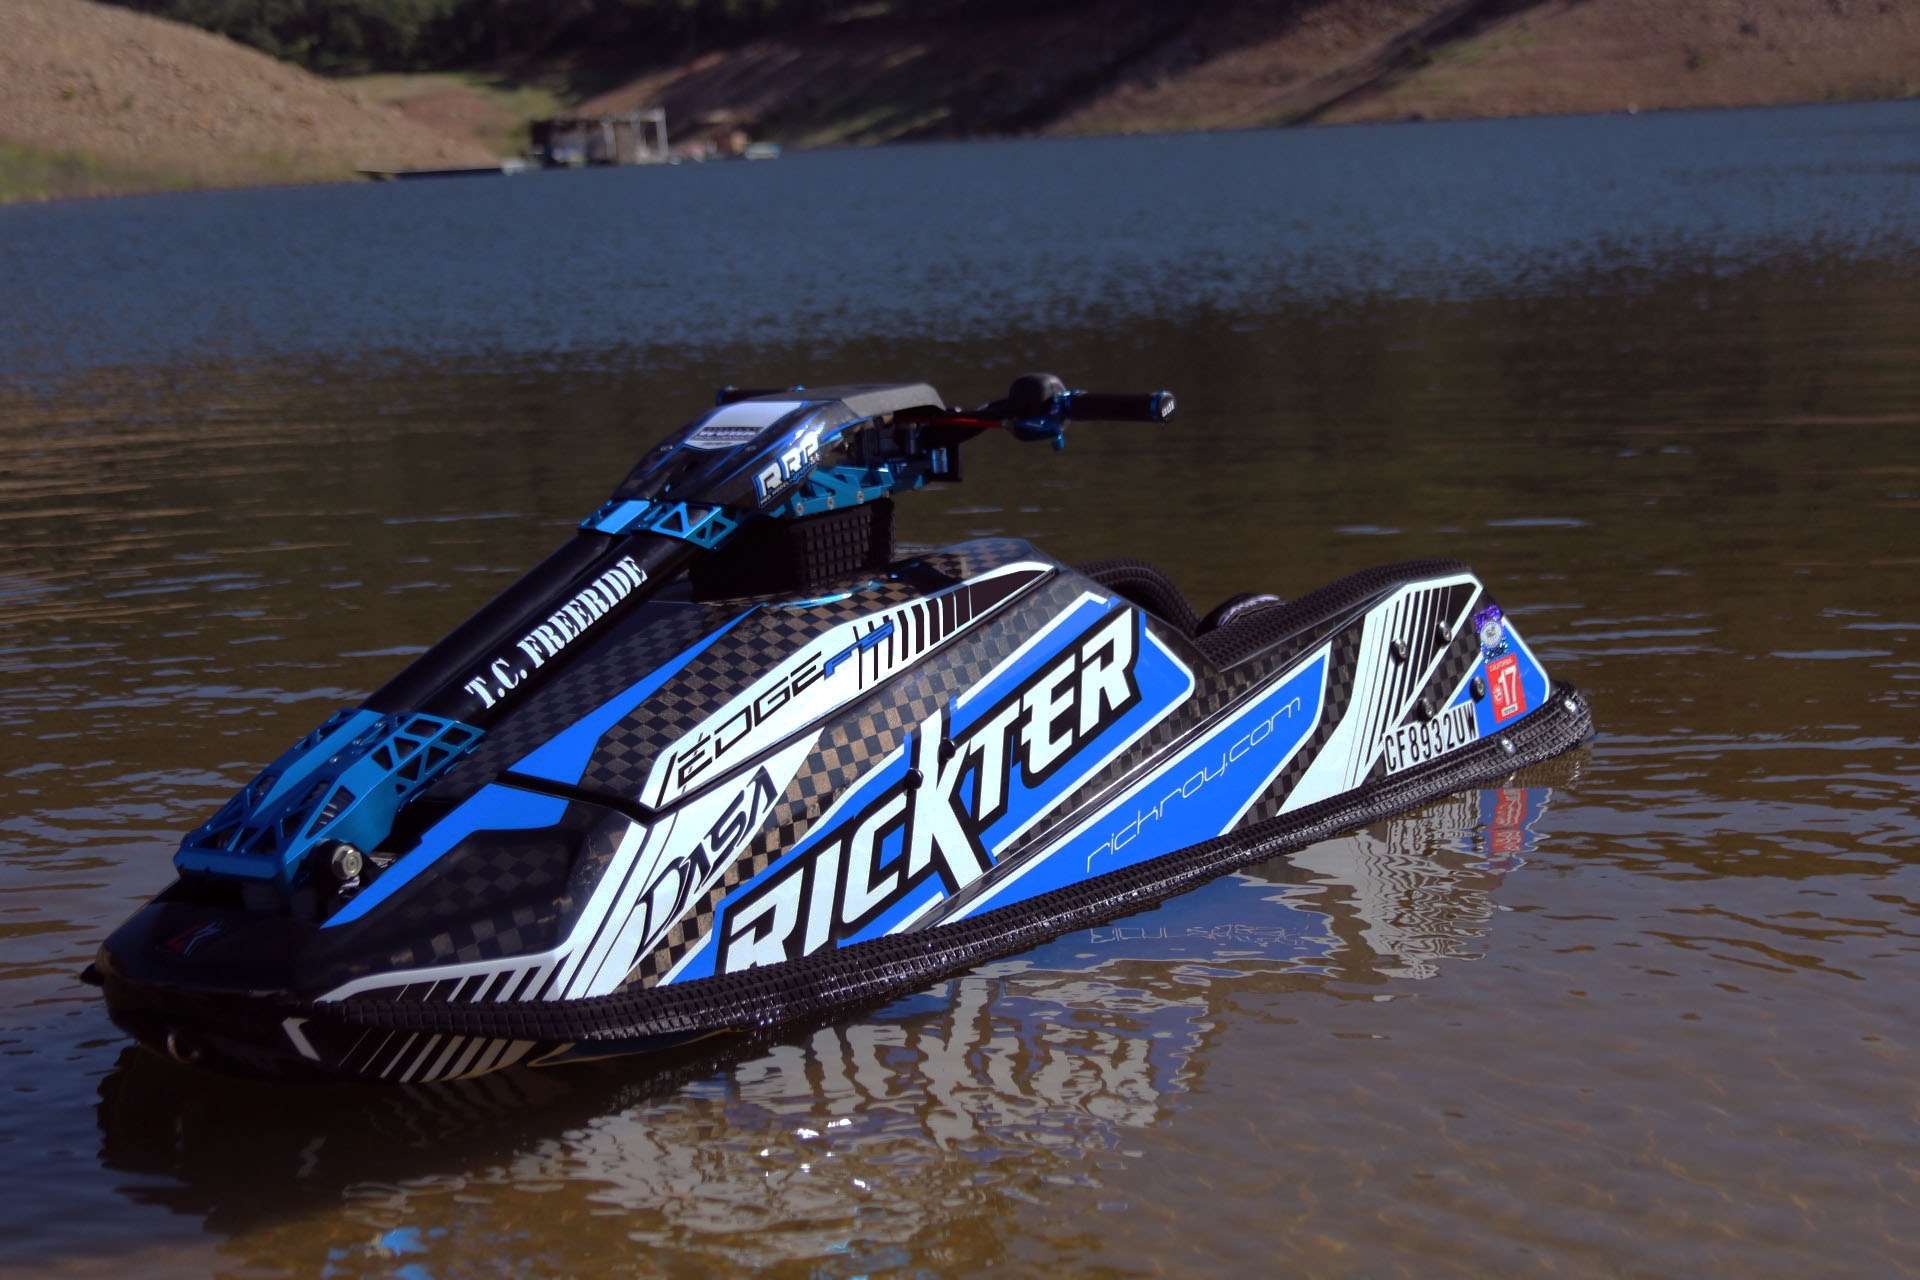 Rickter-RRP blue personal watercraft reinforced by TeXtreme Technology. © TeXtreme 